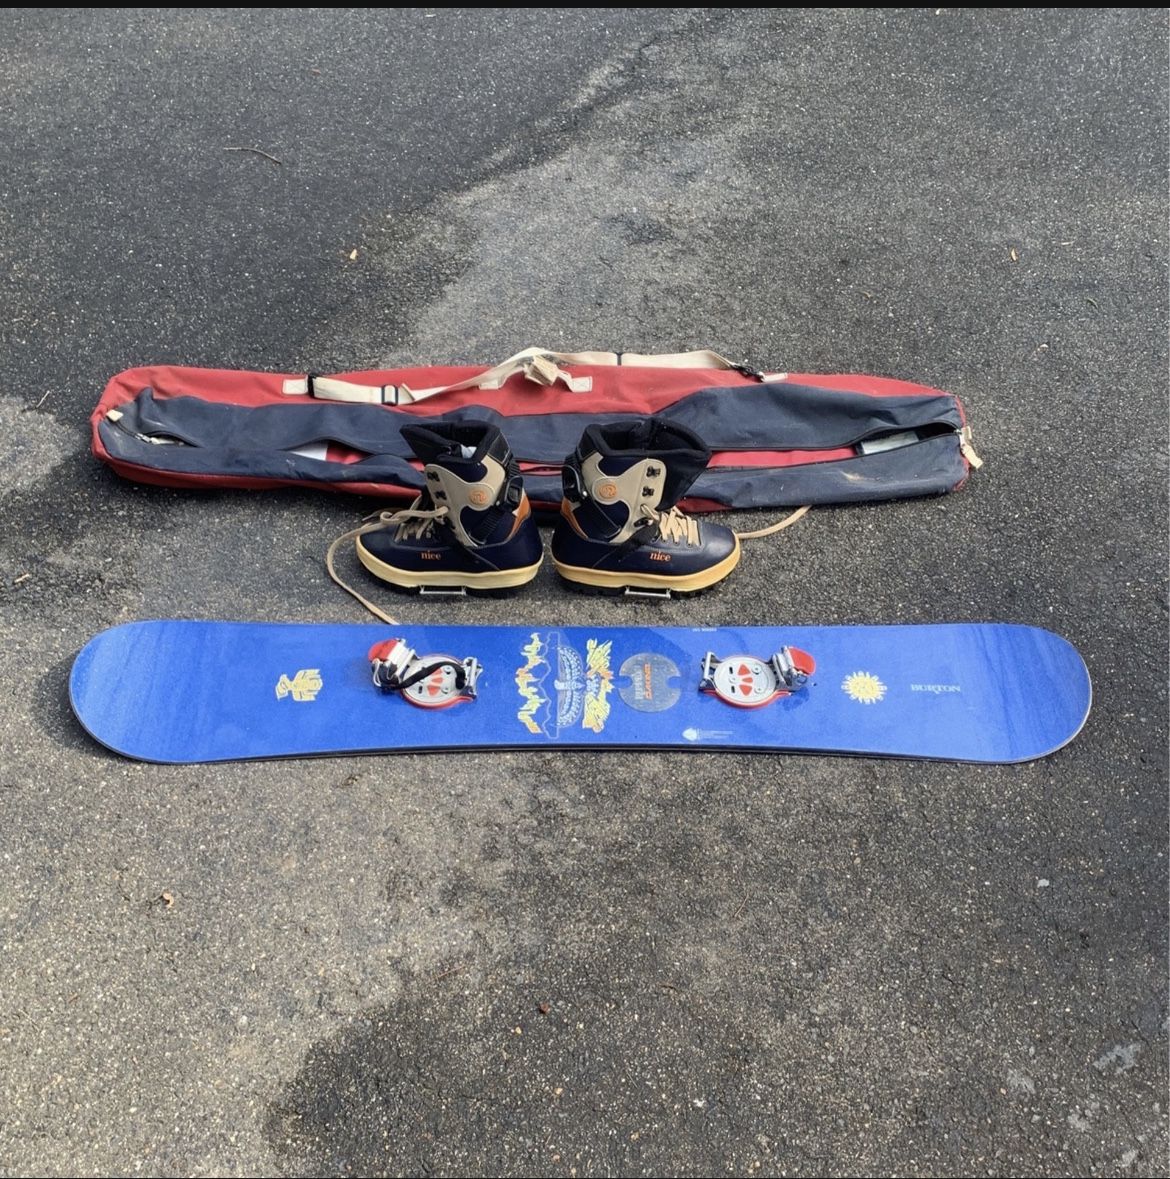 1999 Burton Rippey Pro-Model Vintage - 156 cm w/ Switch Step In Bindings and Nice Size 12 Boots And Travel Bag